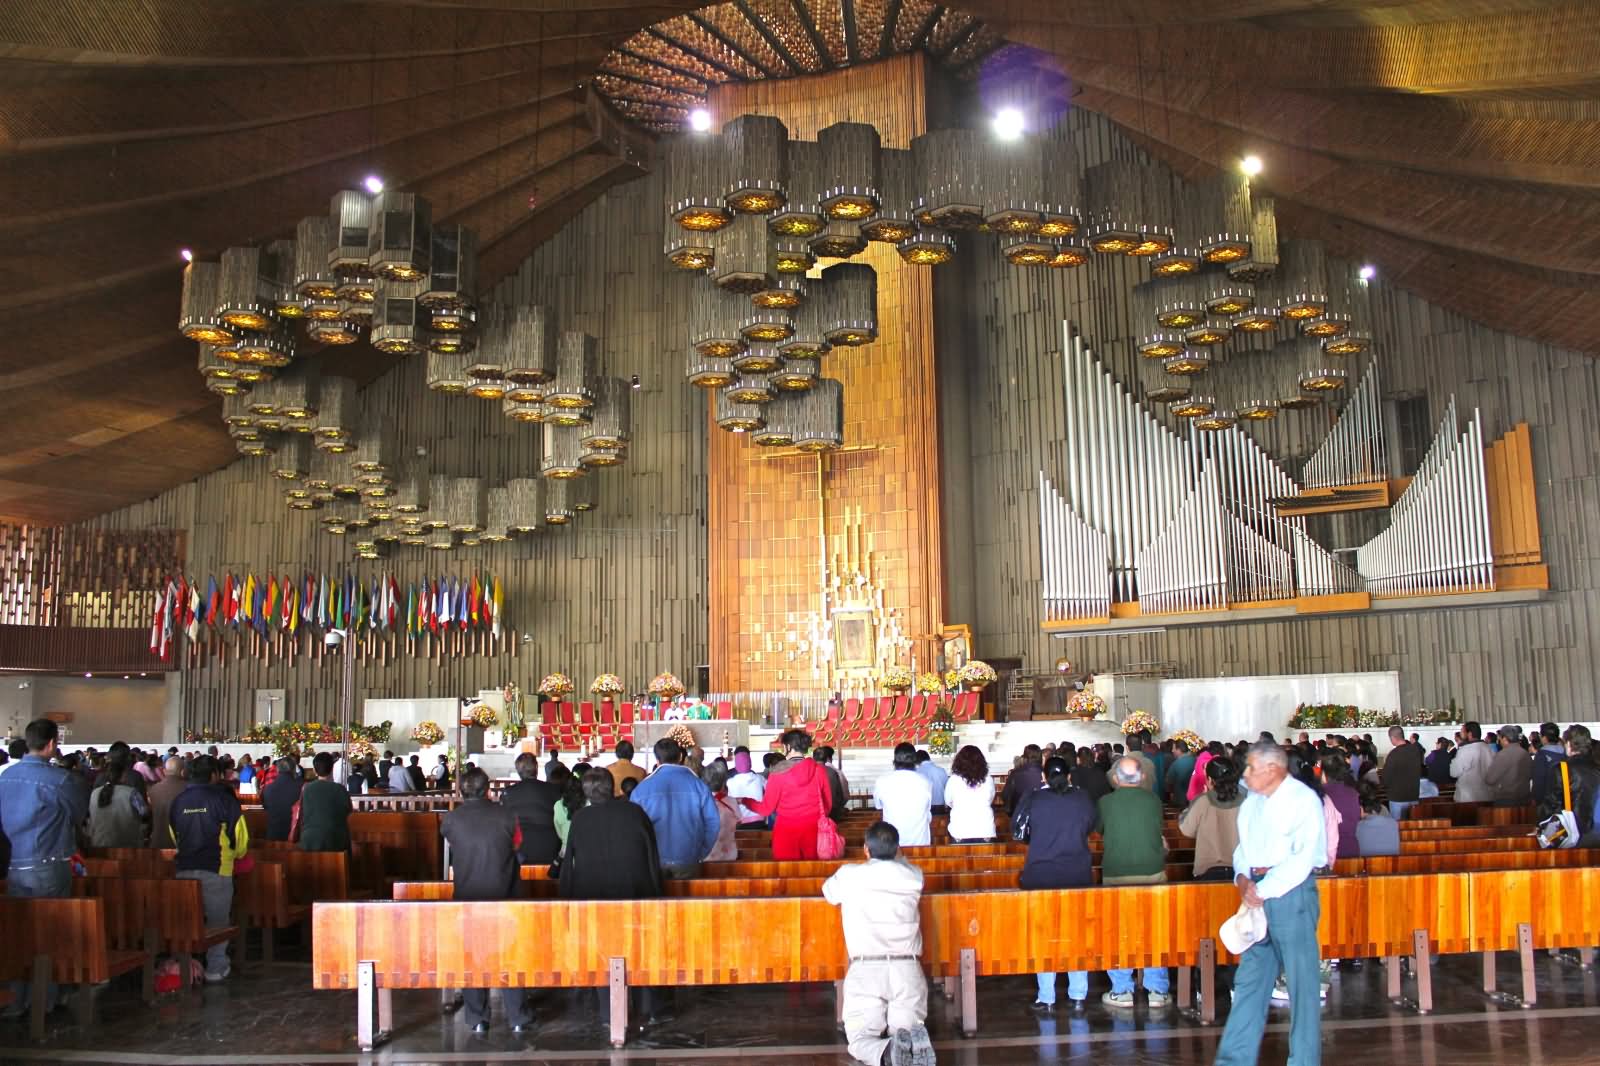 Interior Picture Of The Basilica of Our Lady of Guadalupe